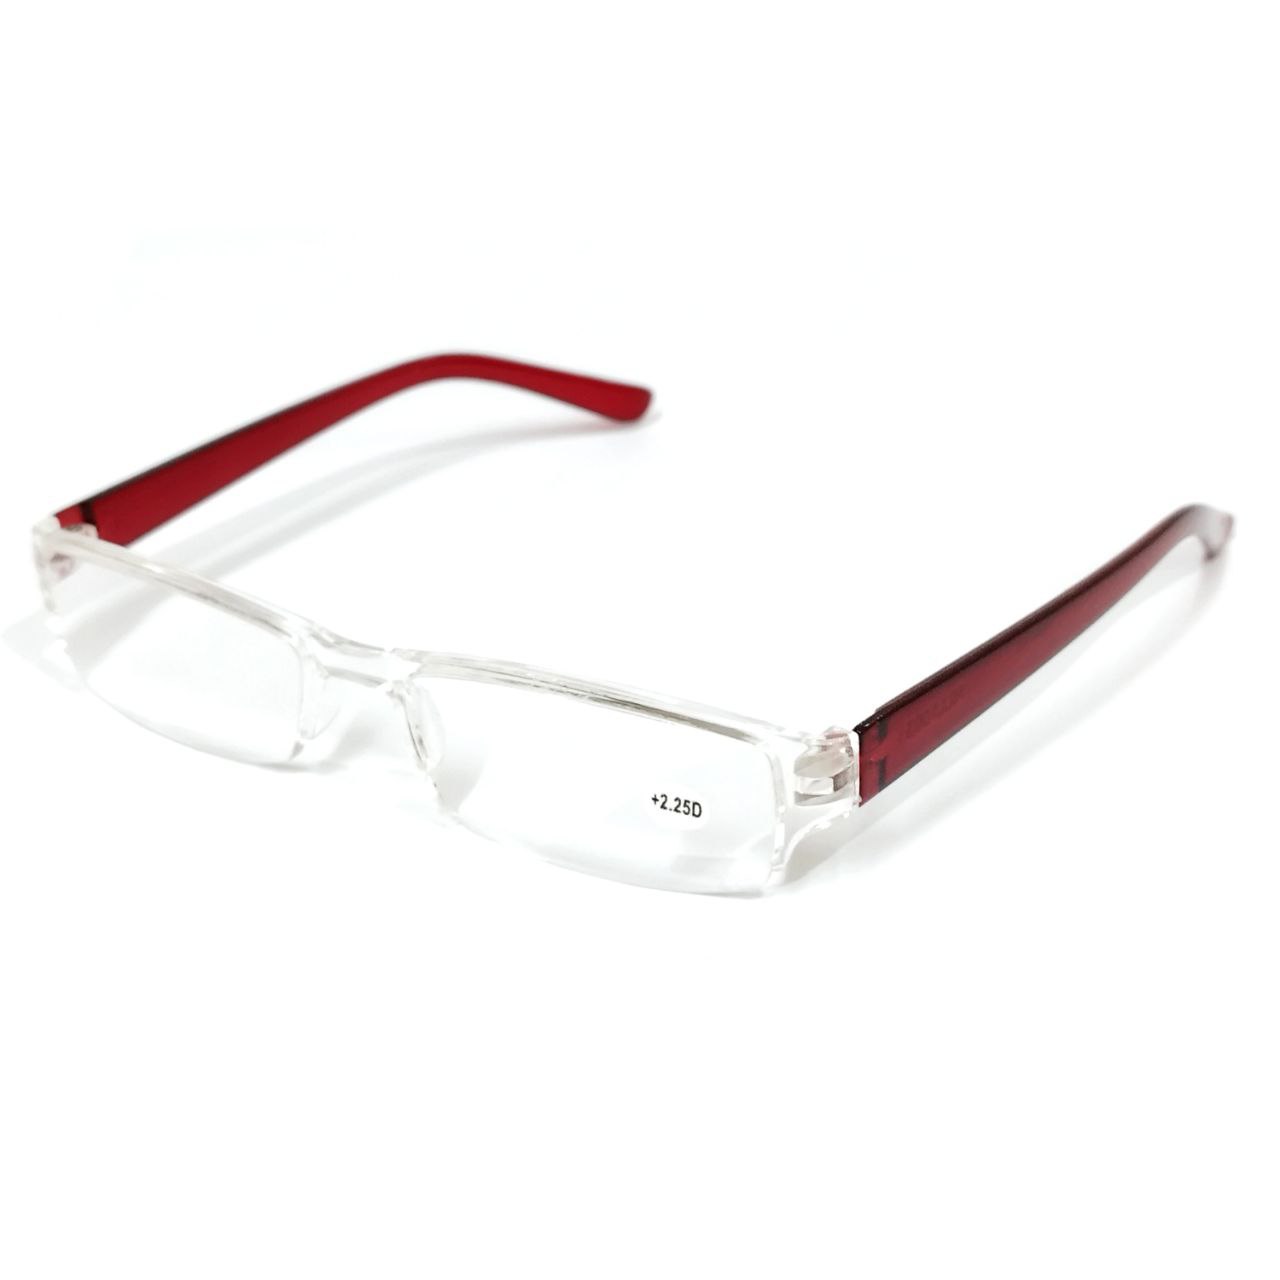 Compact Supra Reading Glasses in Pop Red Color Reading Power +2.25 - Perfect for On-the-Go